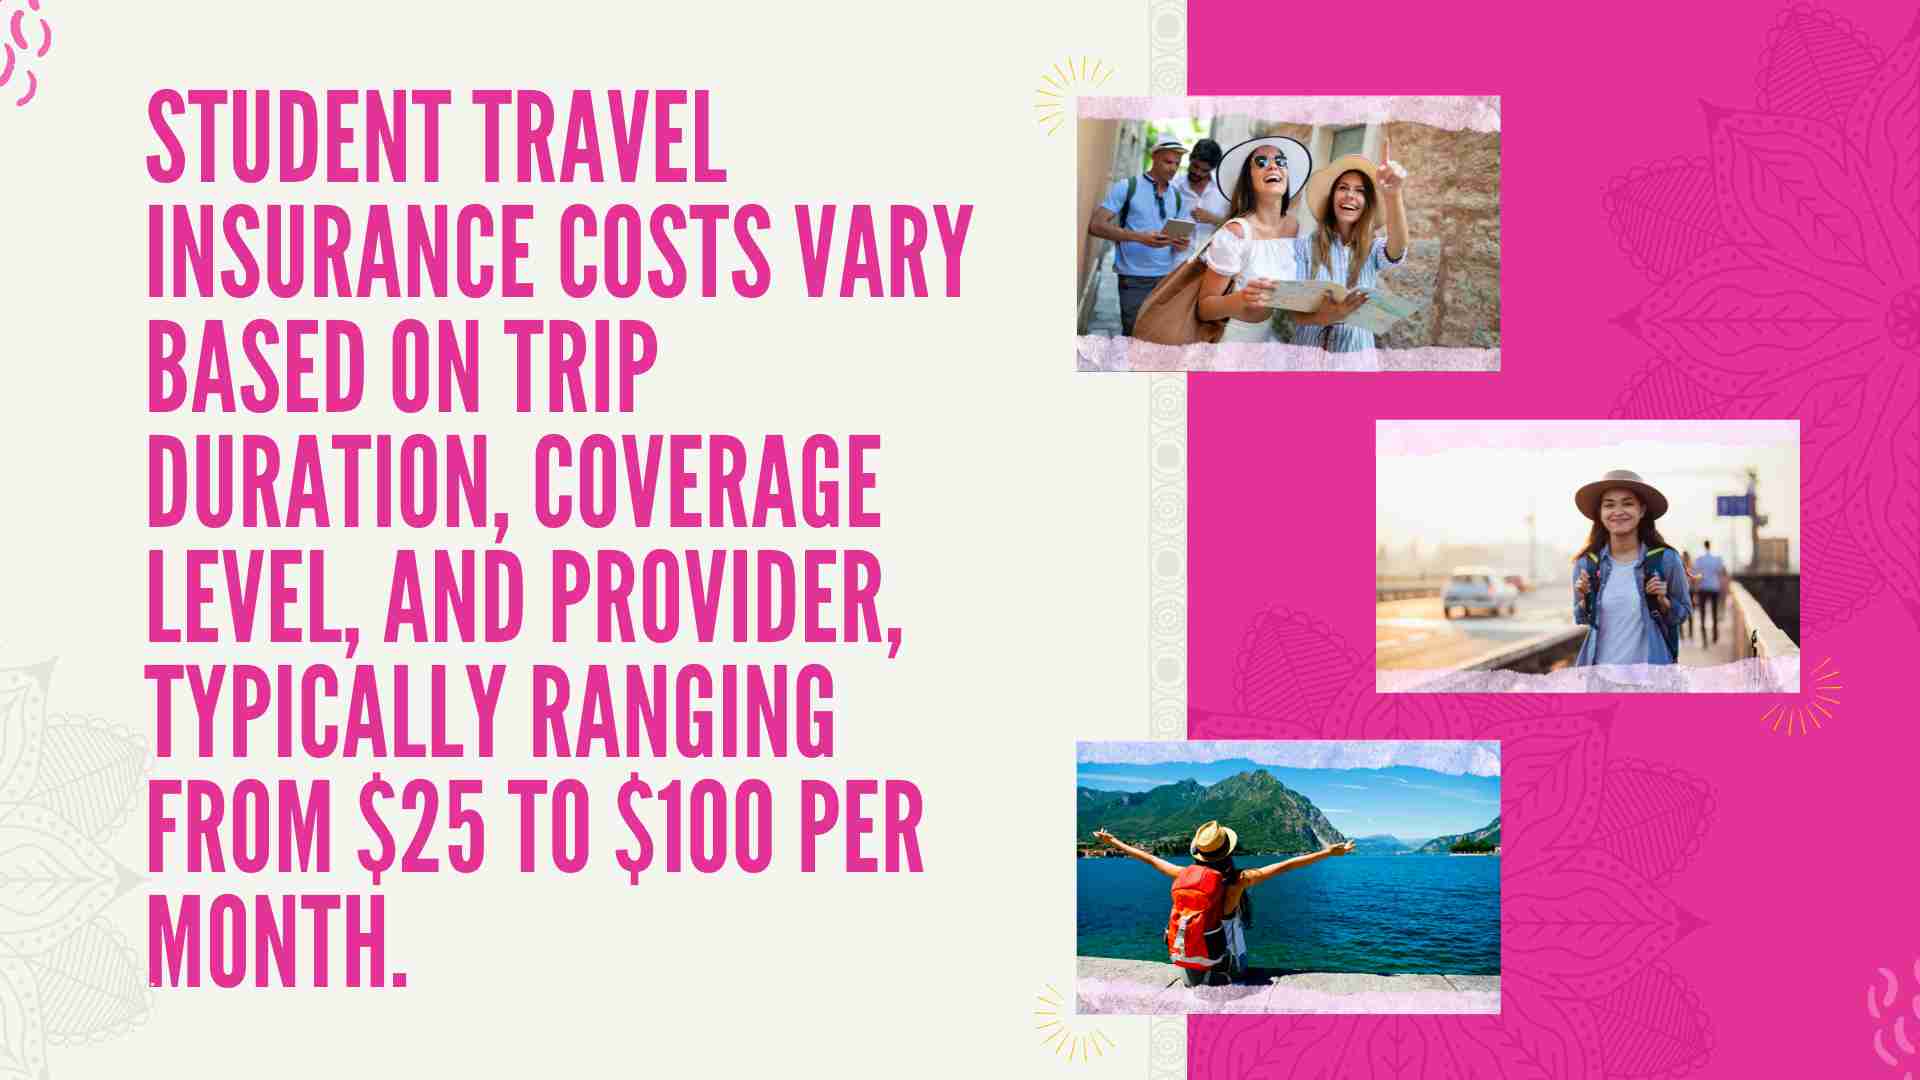 How much is Student travel insurance